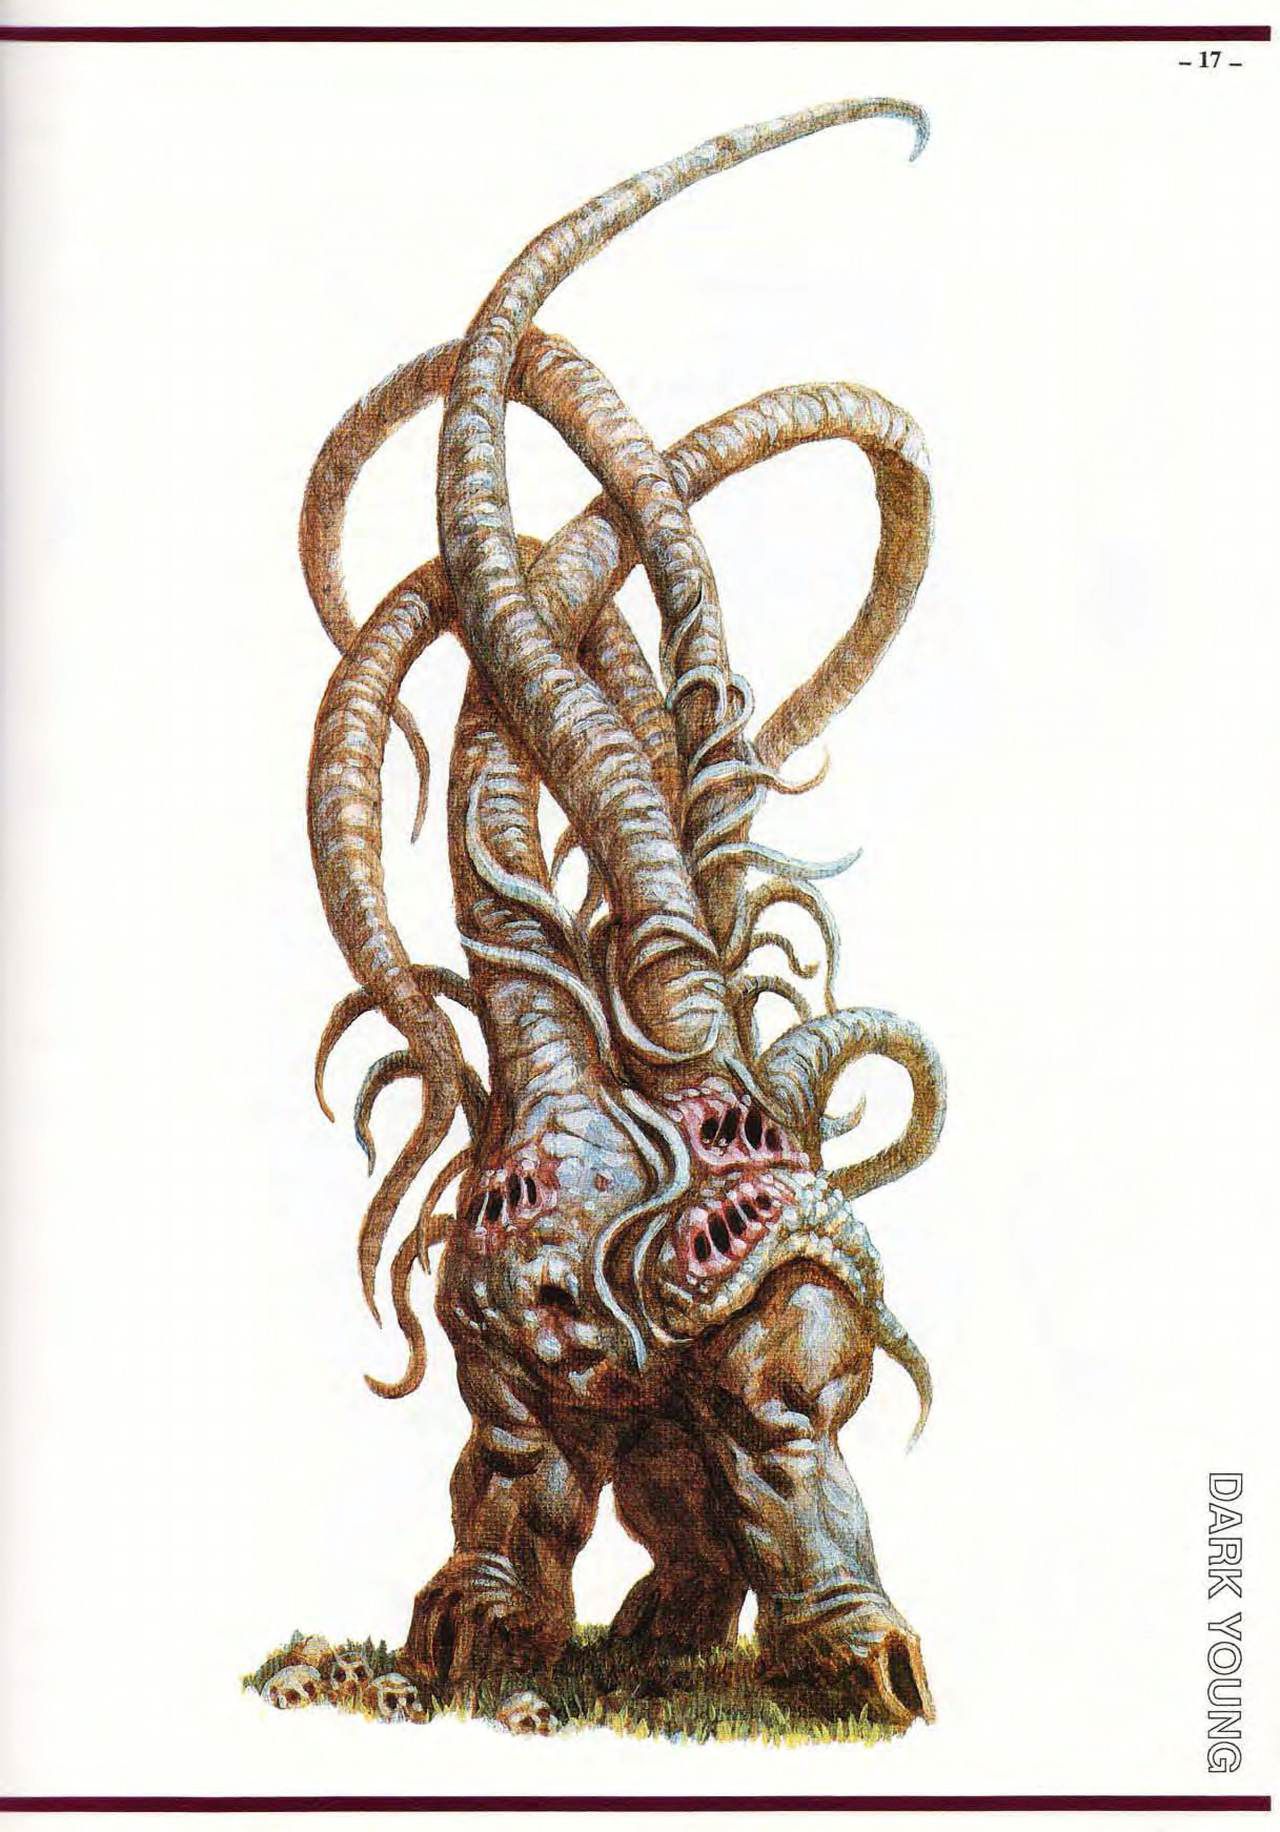 S. Petersen's Field Guide to Lovecraftian Horrors 17